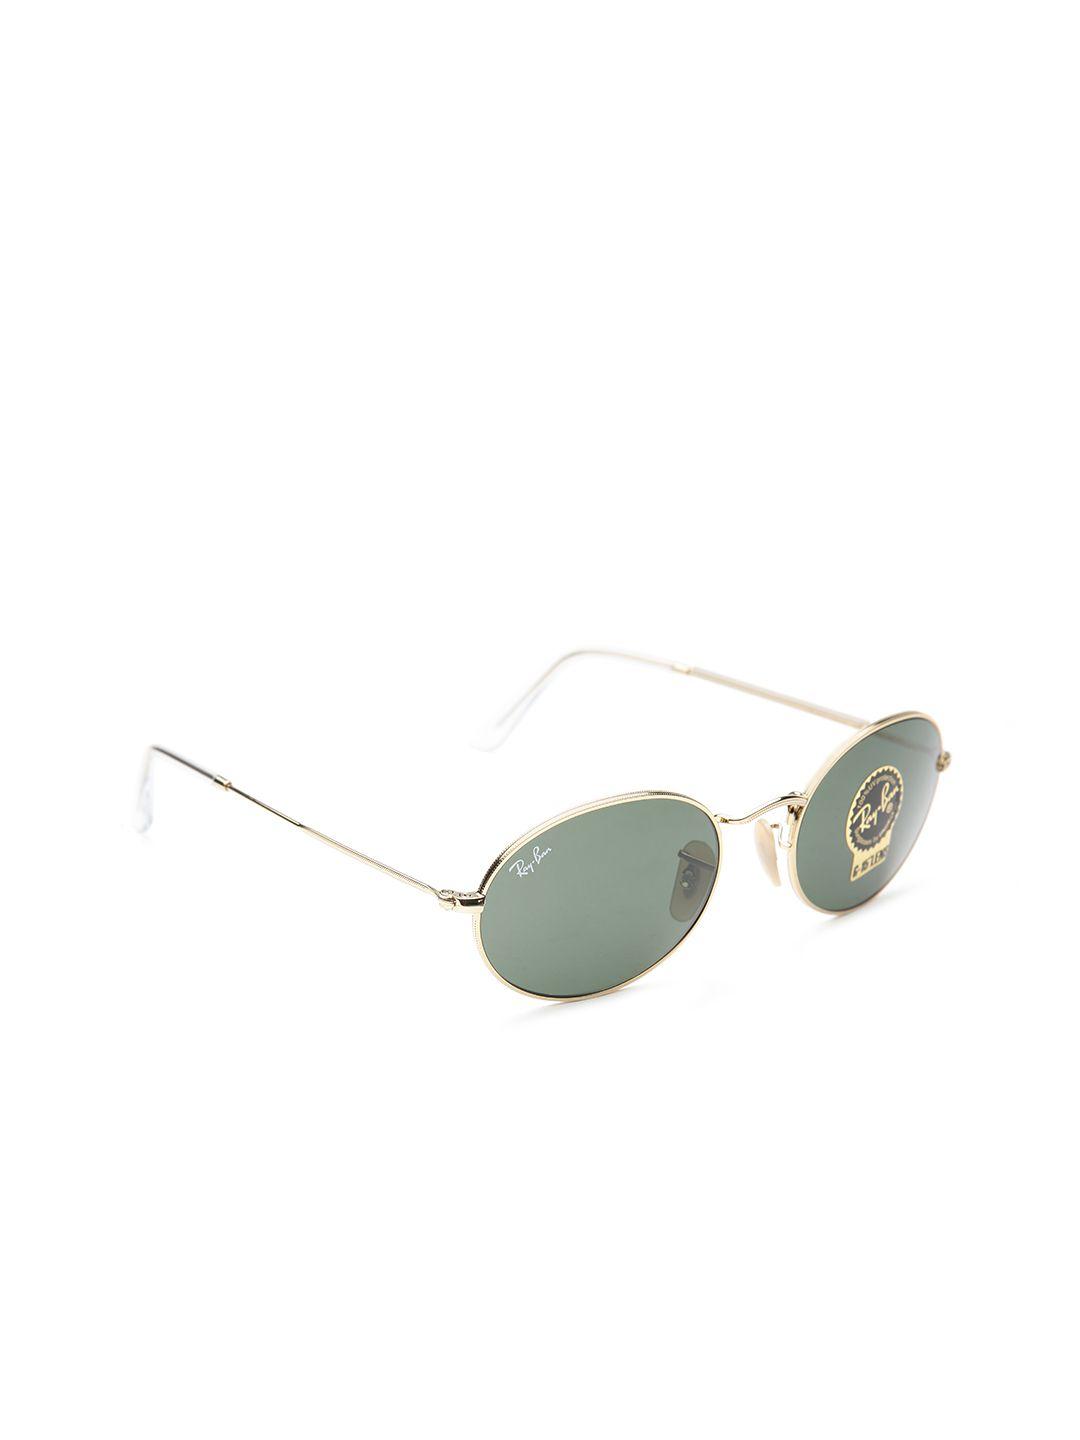 ray-ban unisex oval sunglasses 0rb3547001/31